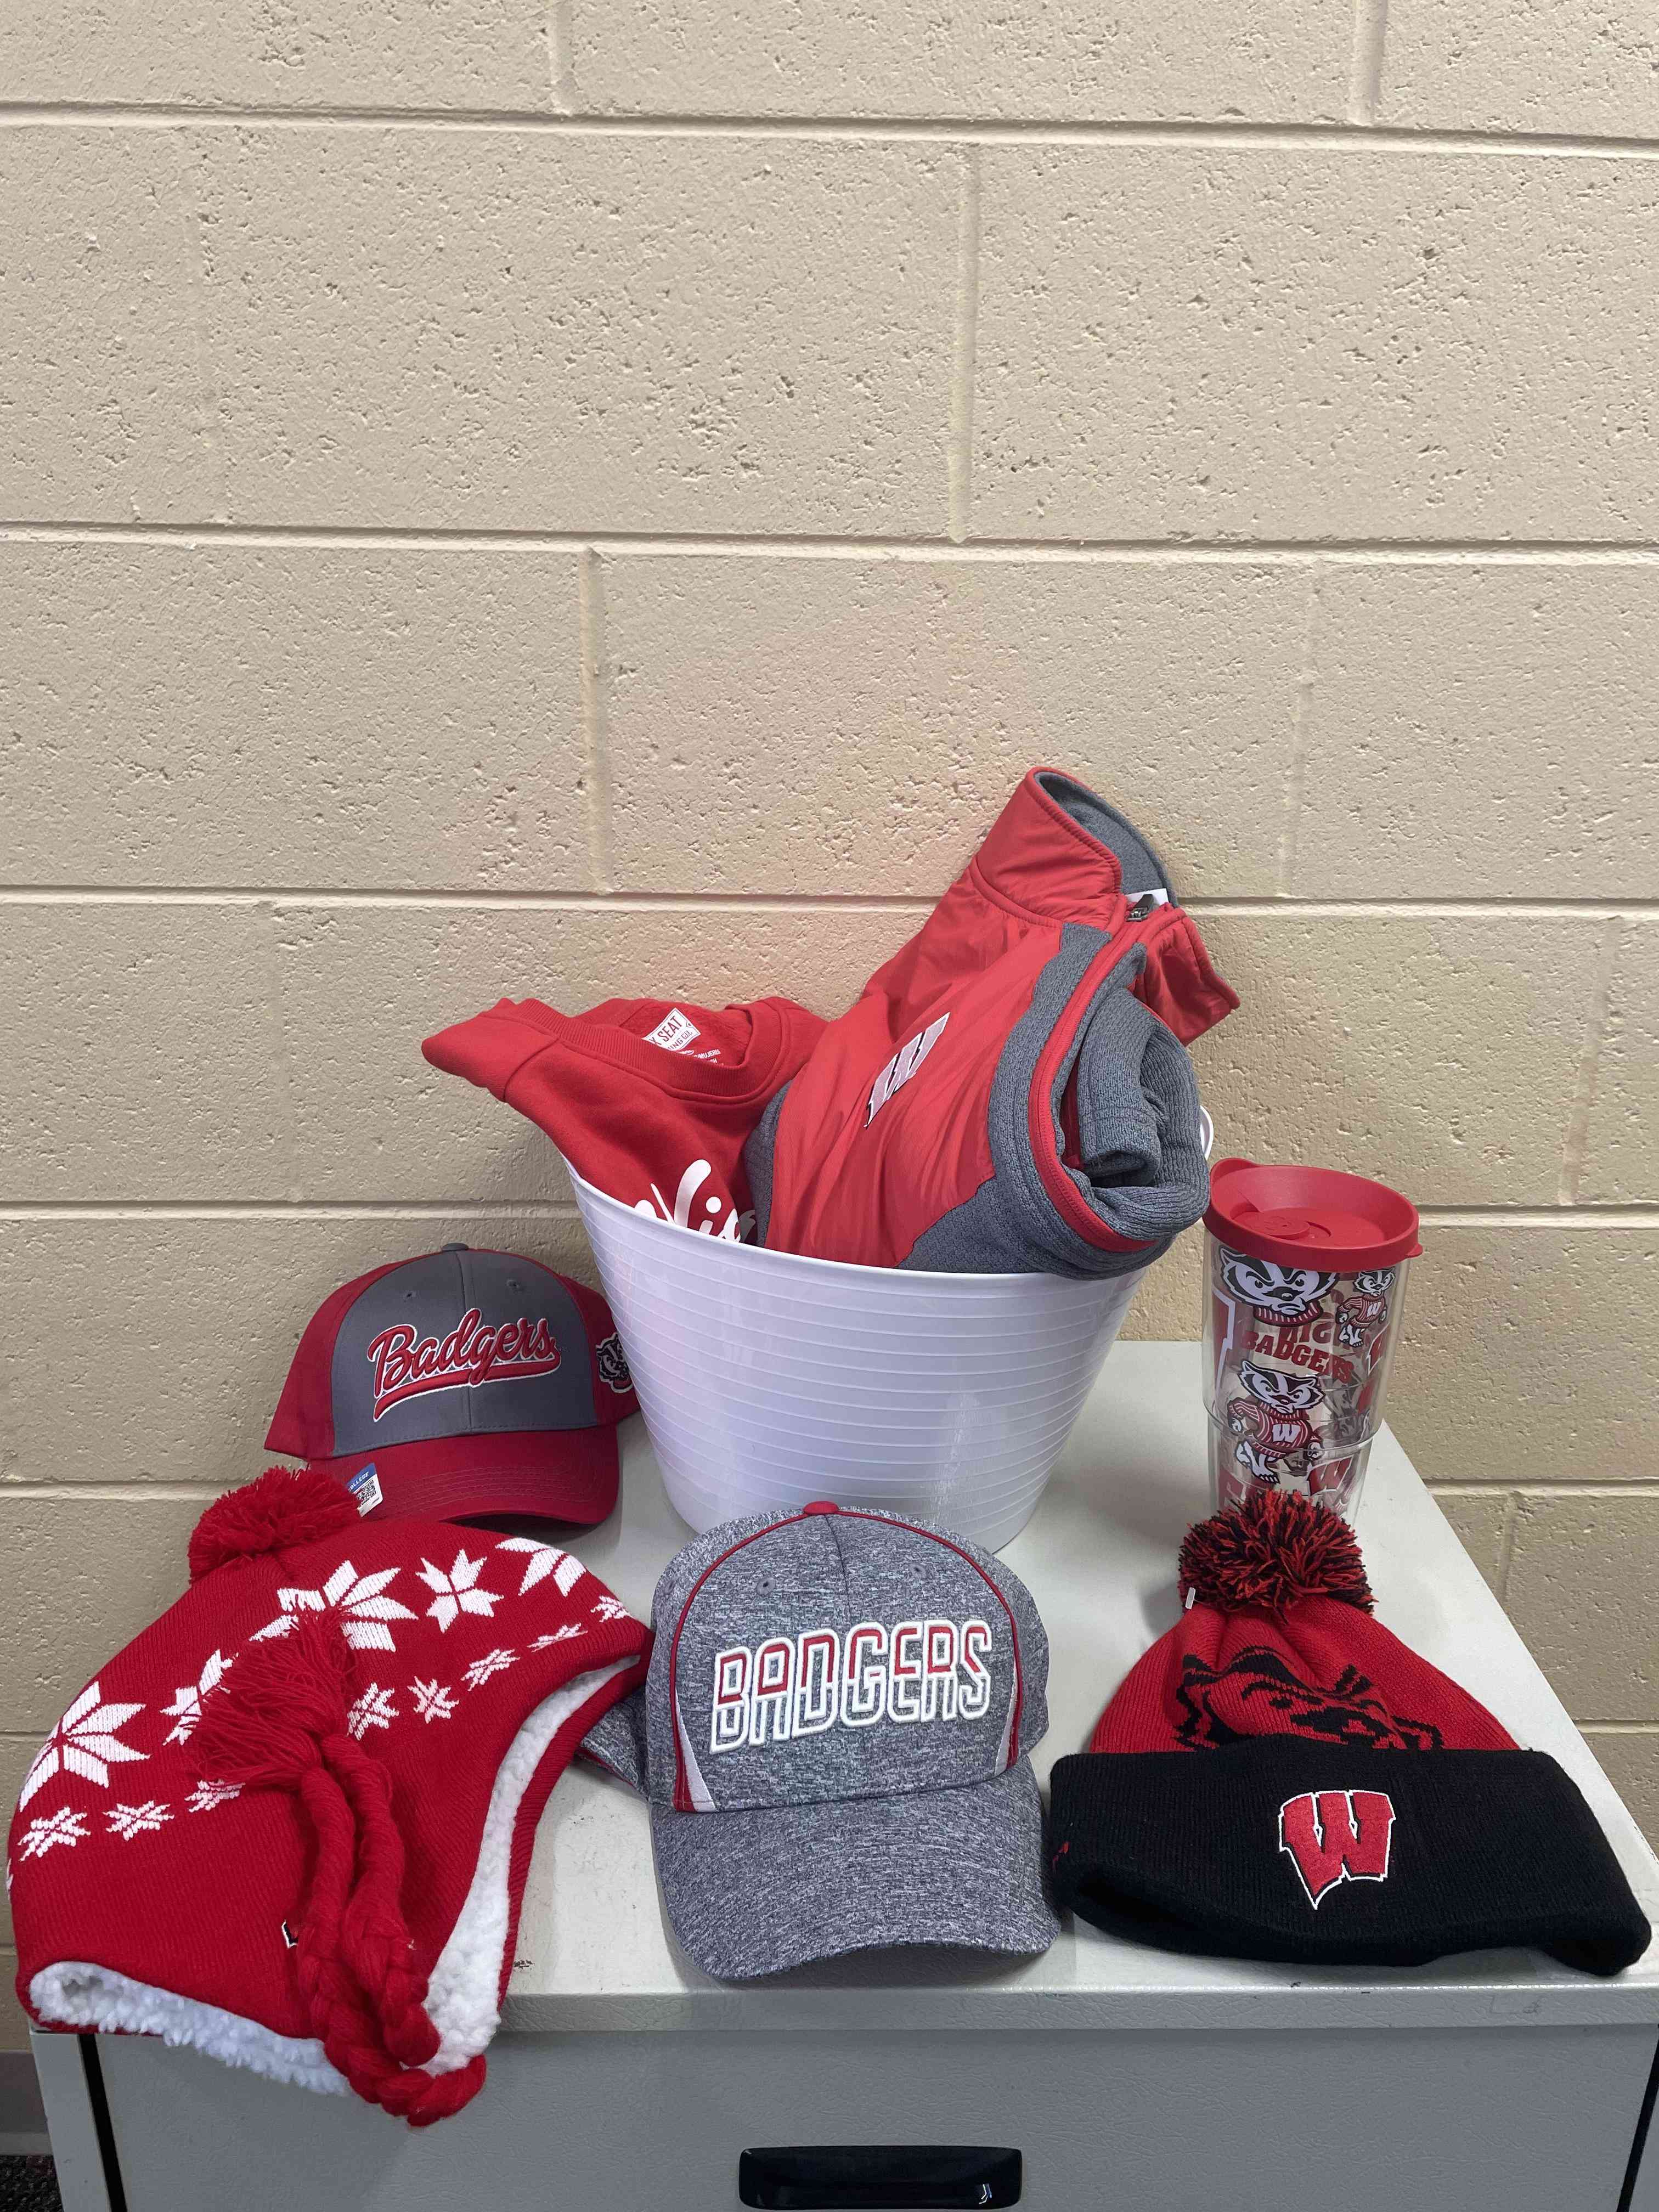 28. Wisconsin Badgers by Titans Team Image